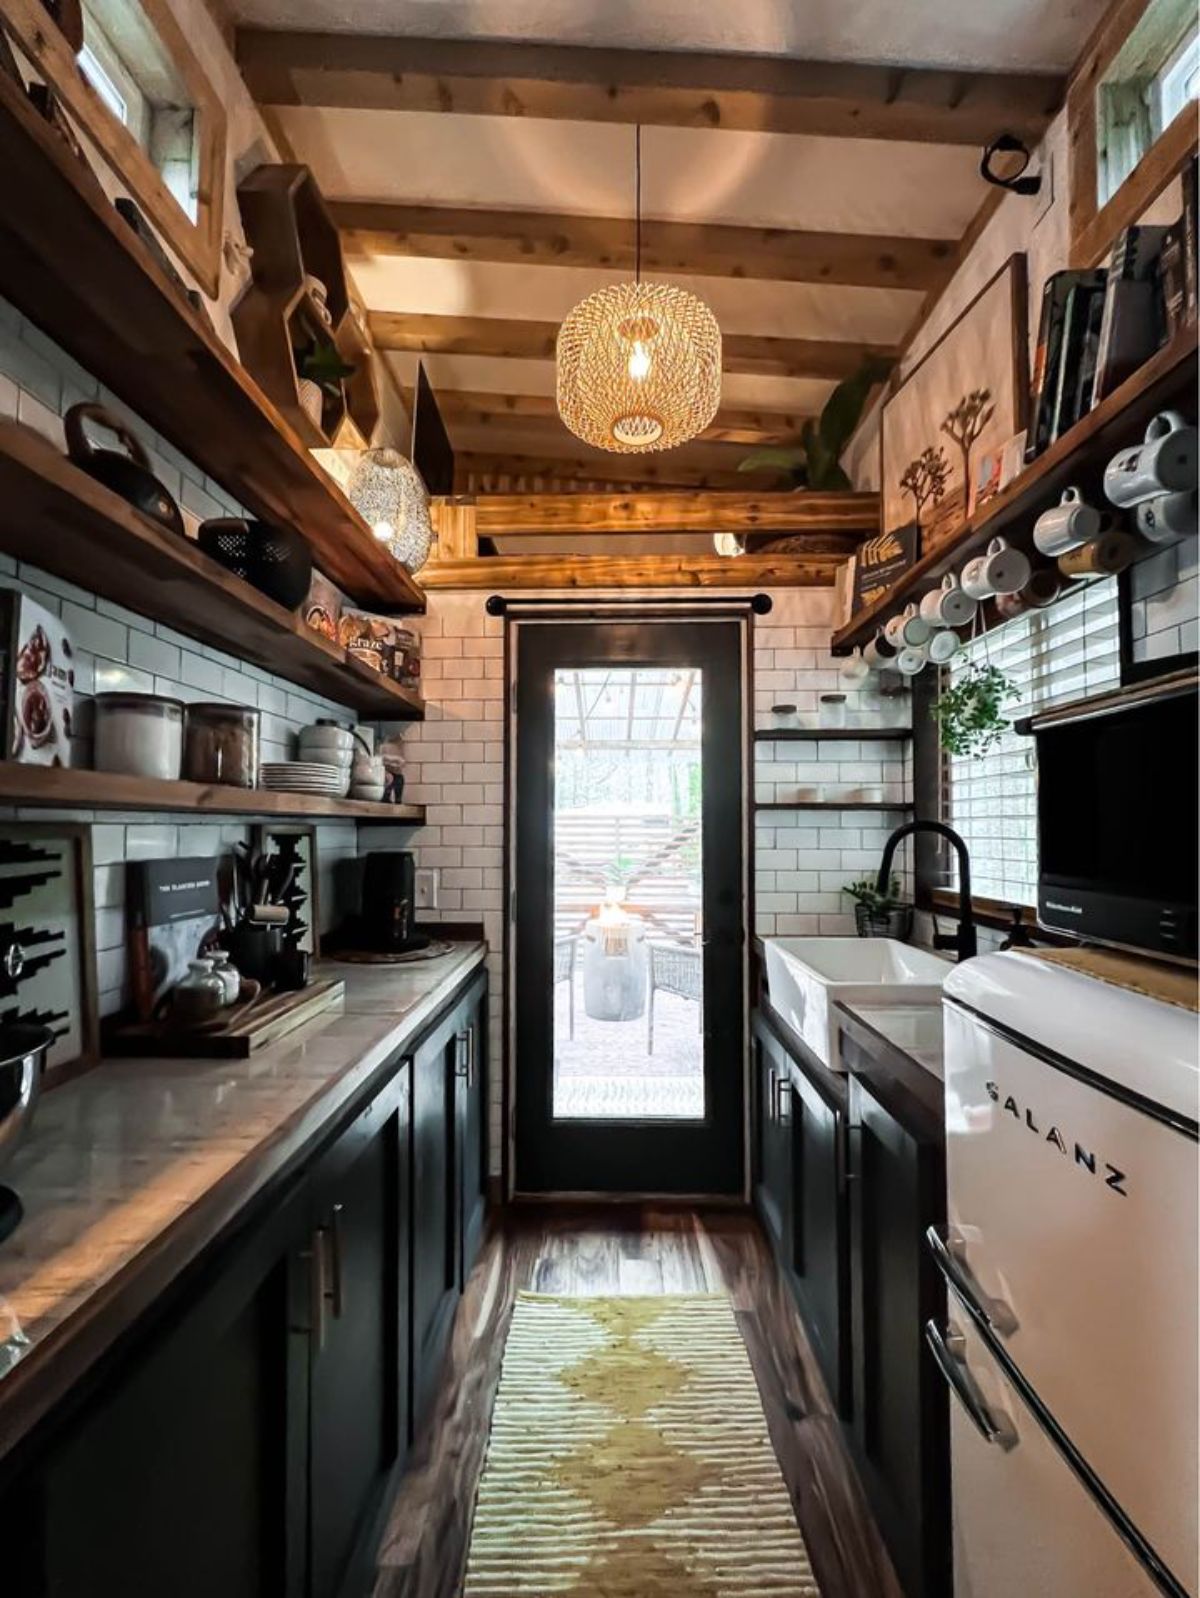 Kitchen of tiny house on wheels with ample storage space and cabinets